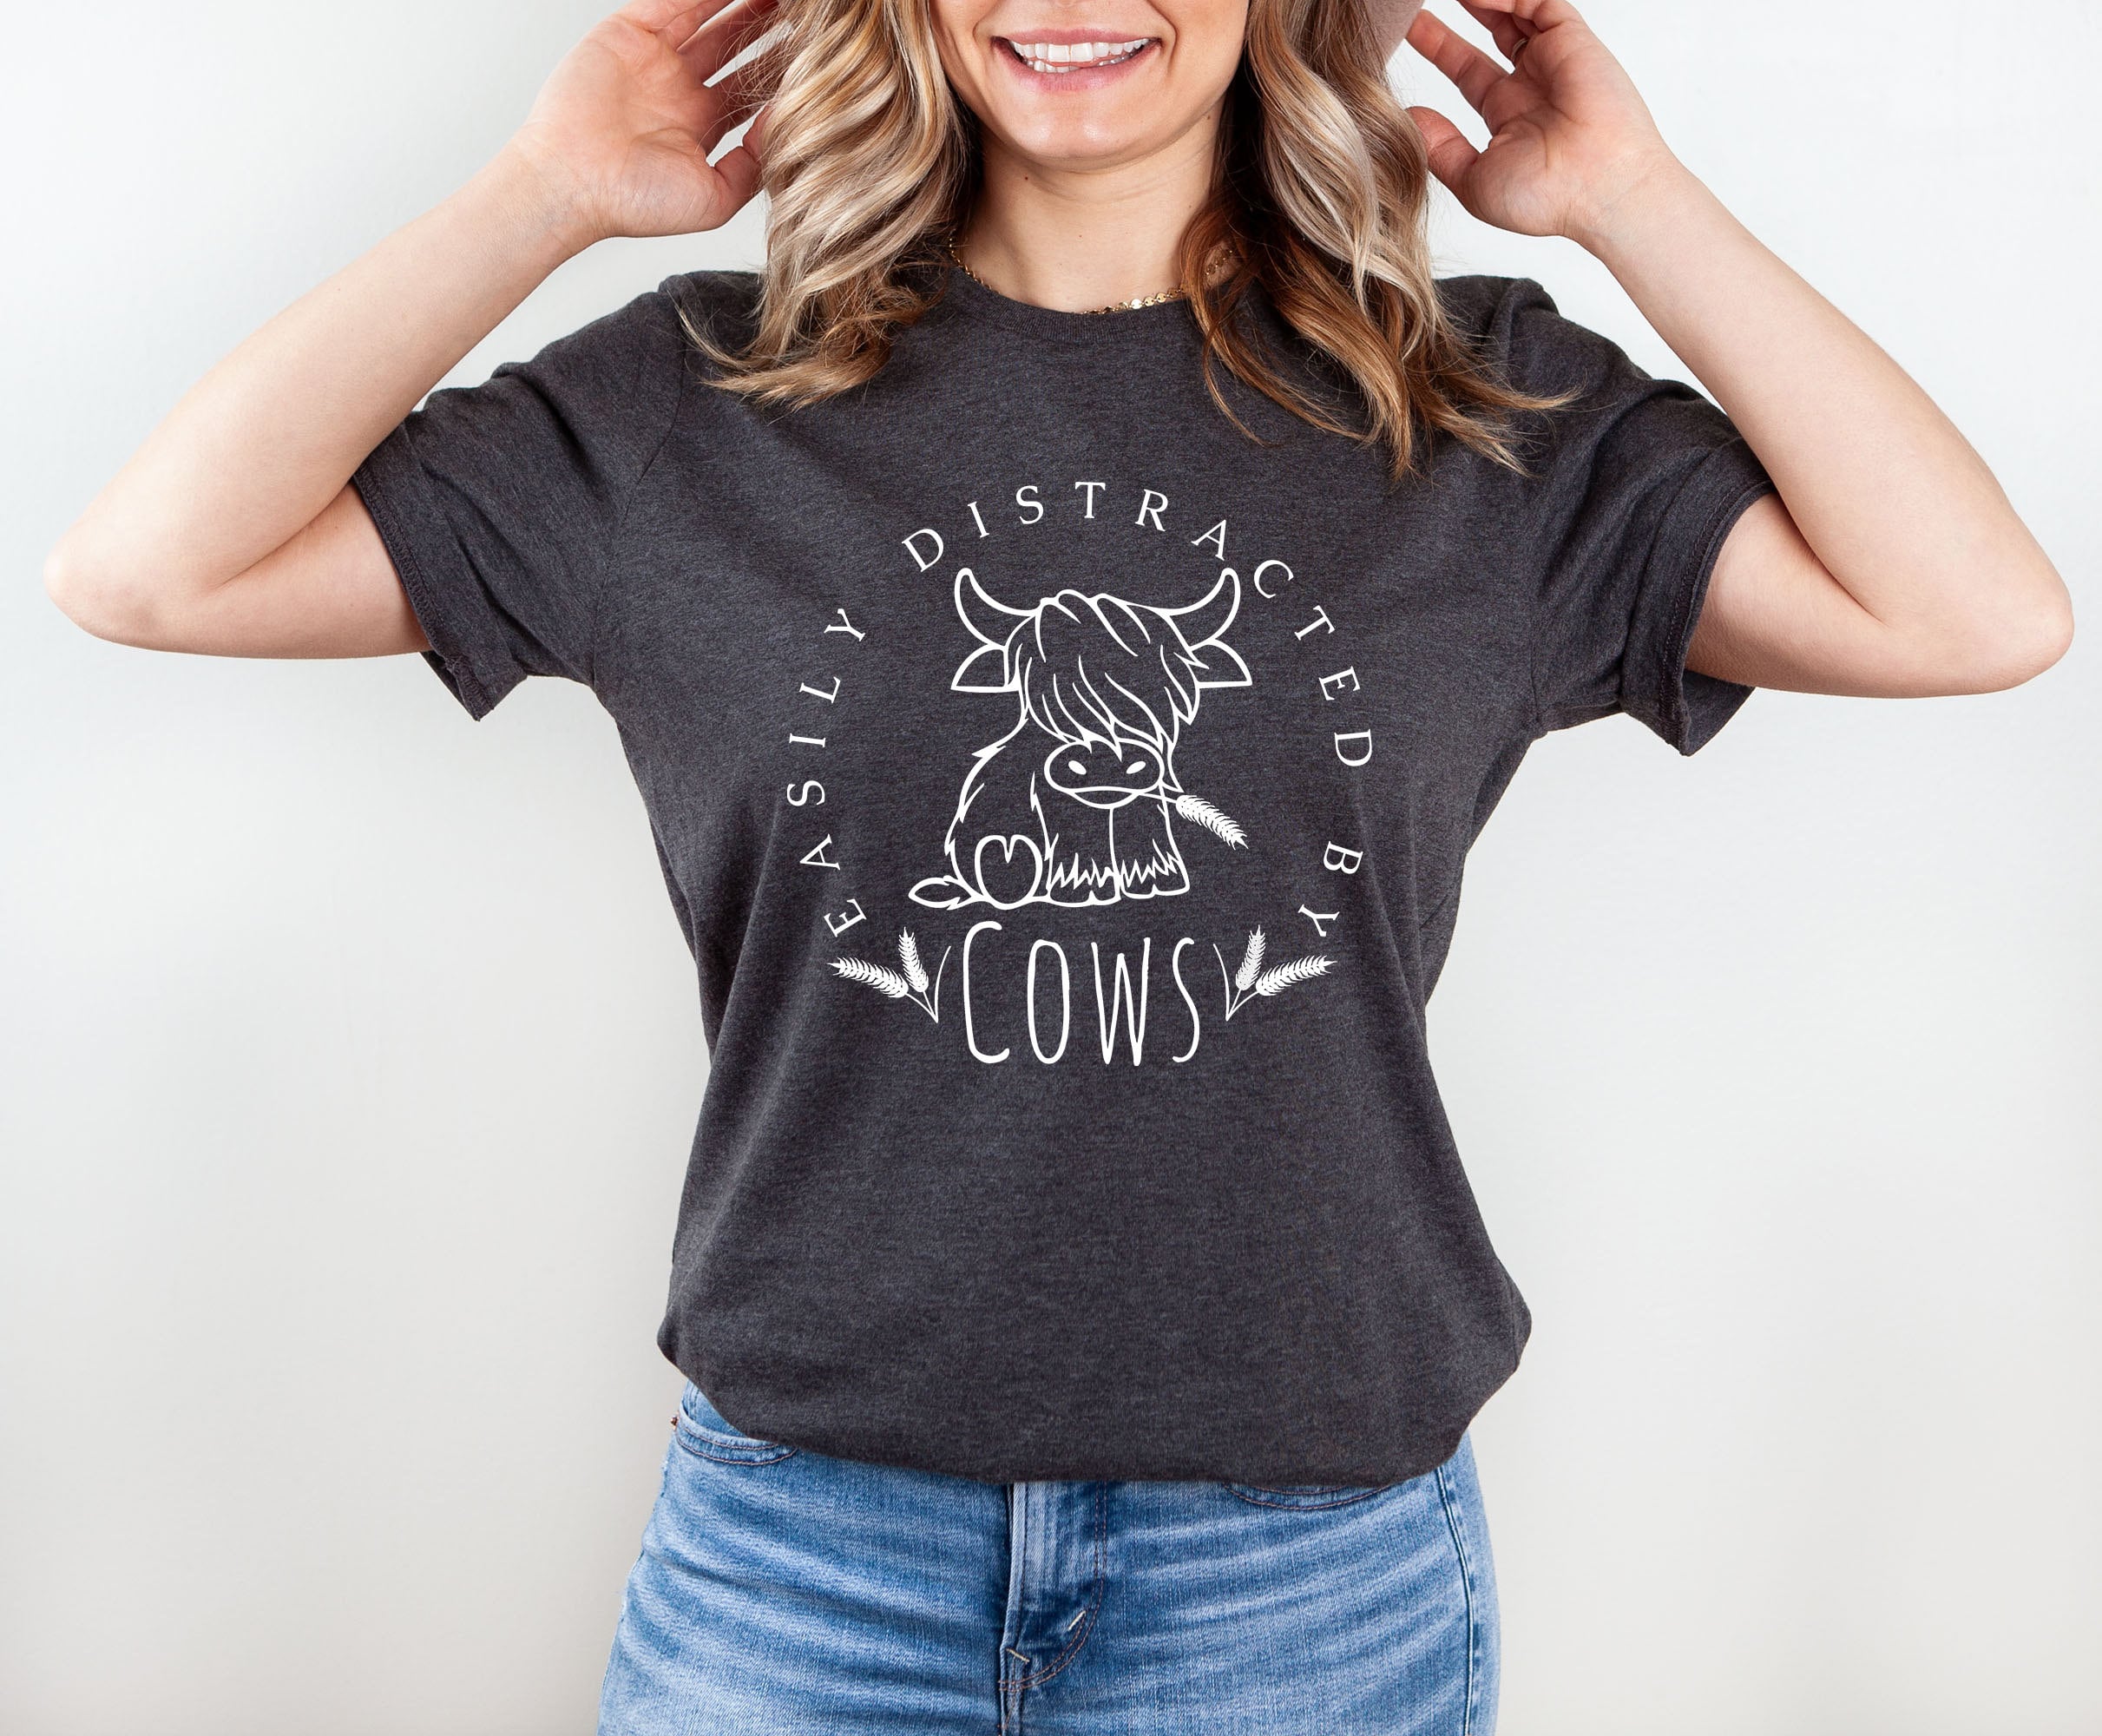 Easily Distracted by Cows Shirt, Cow Lover Gift, Cute Cow Shirt, Cow Shirt, Animal Lover Shirt, Funny Cow Shirt, Farm Animal Shirt